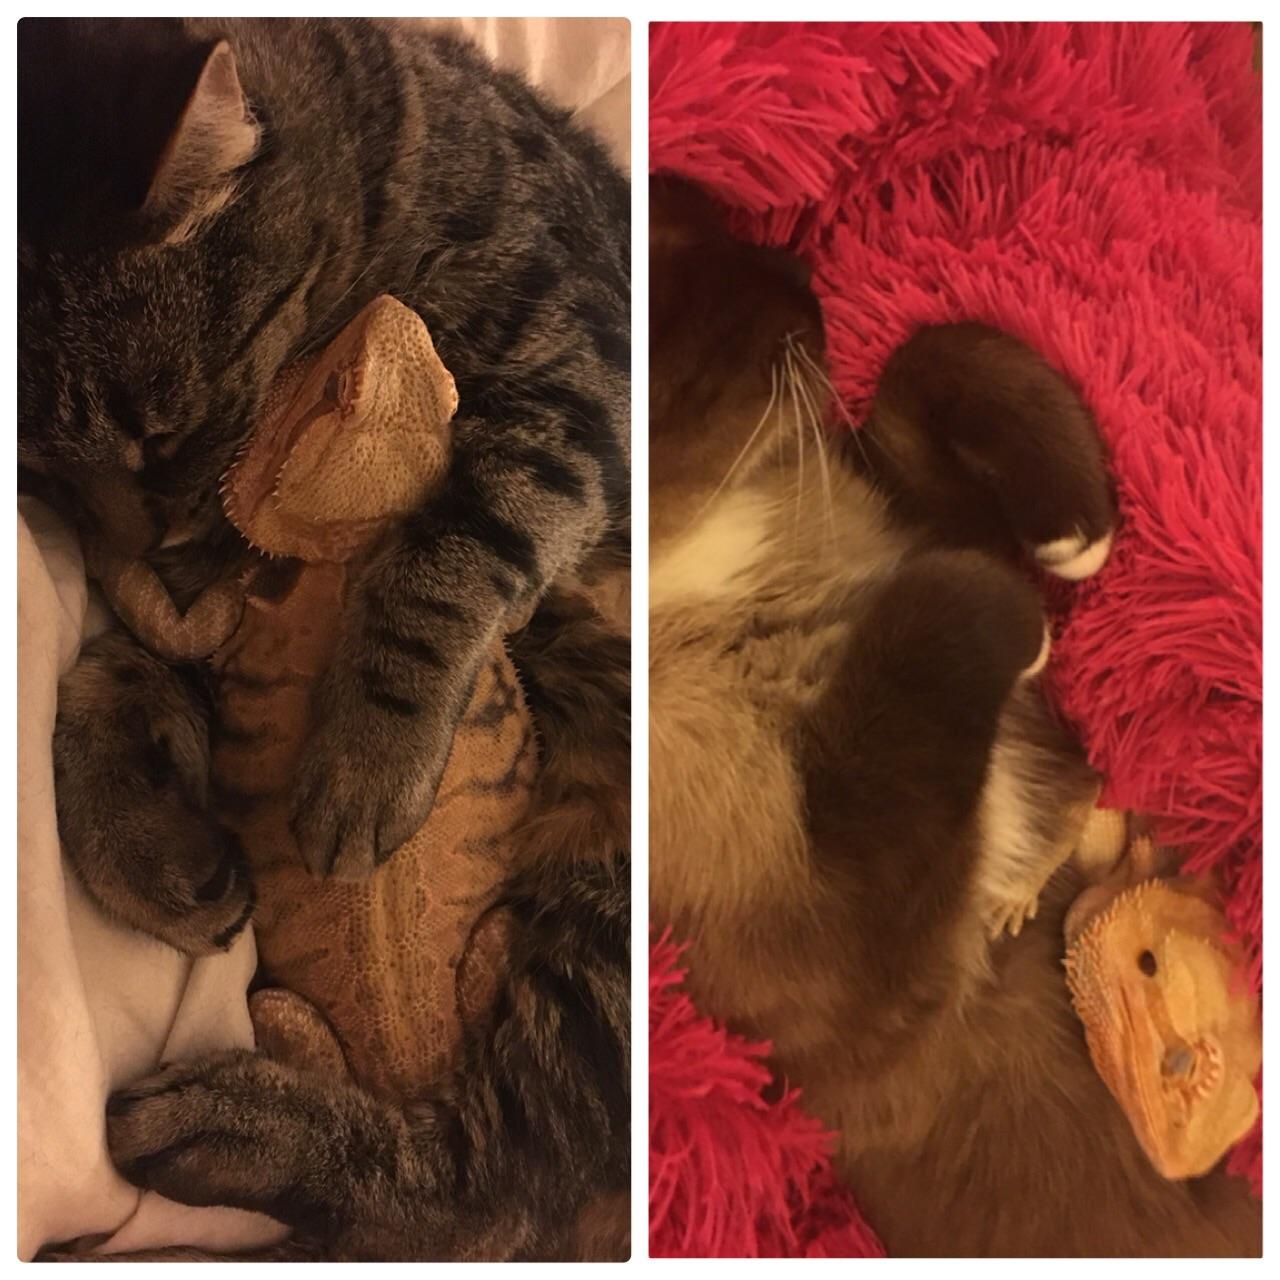 cat cuddling with a bearded dragon